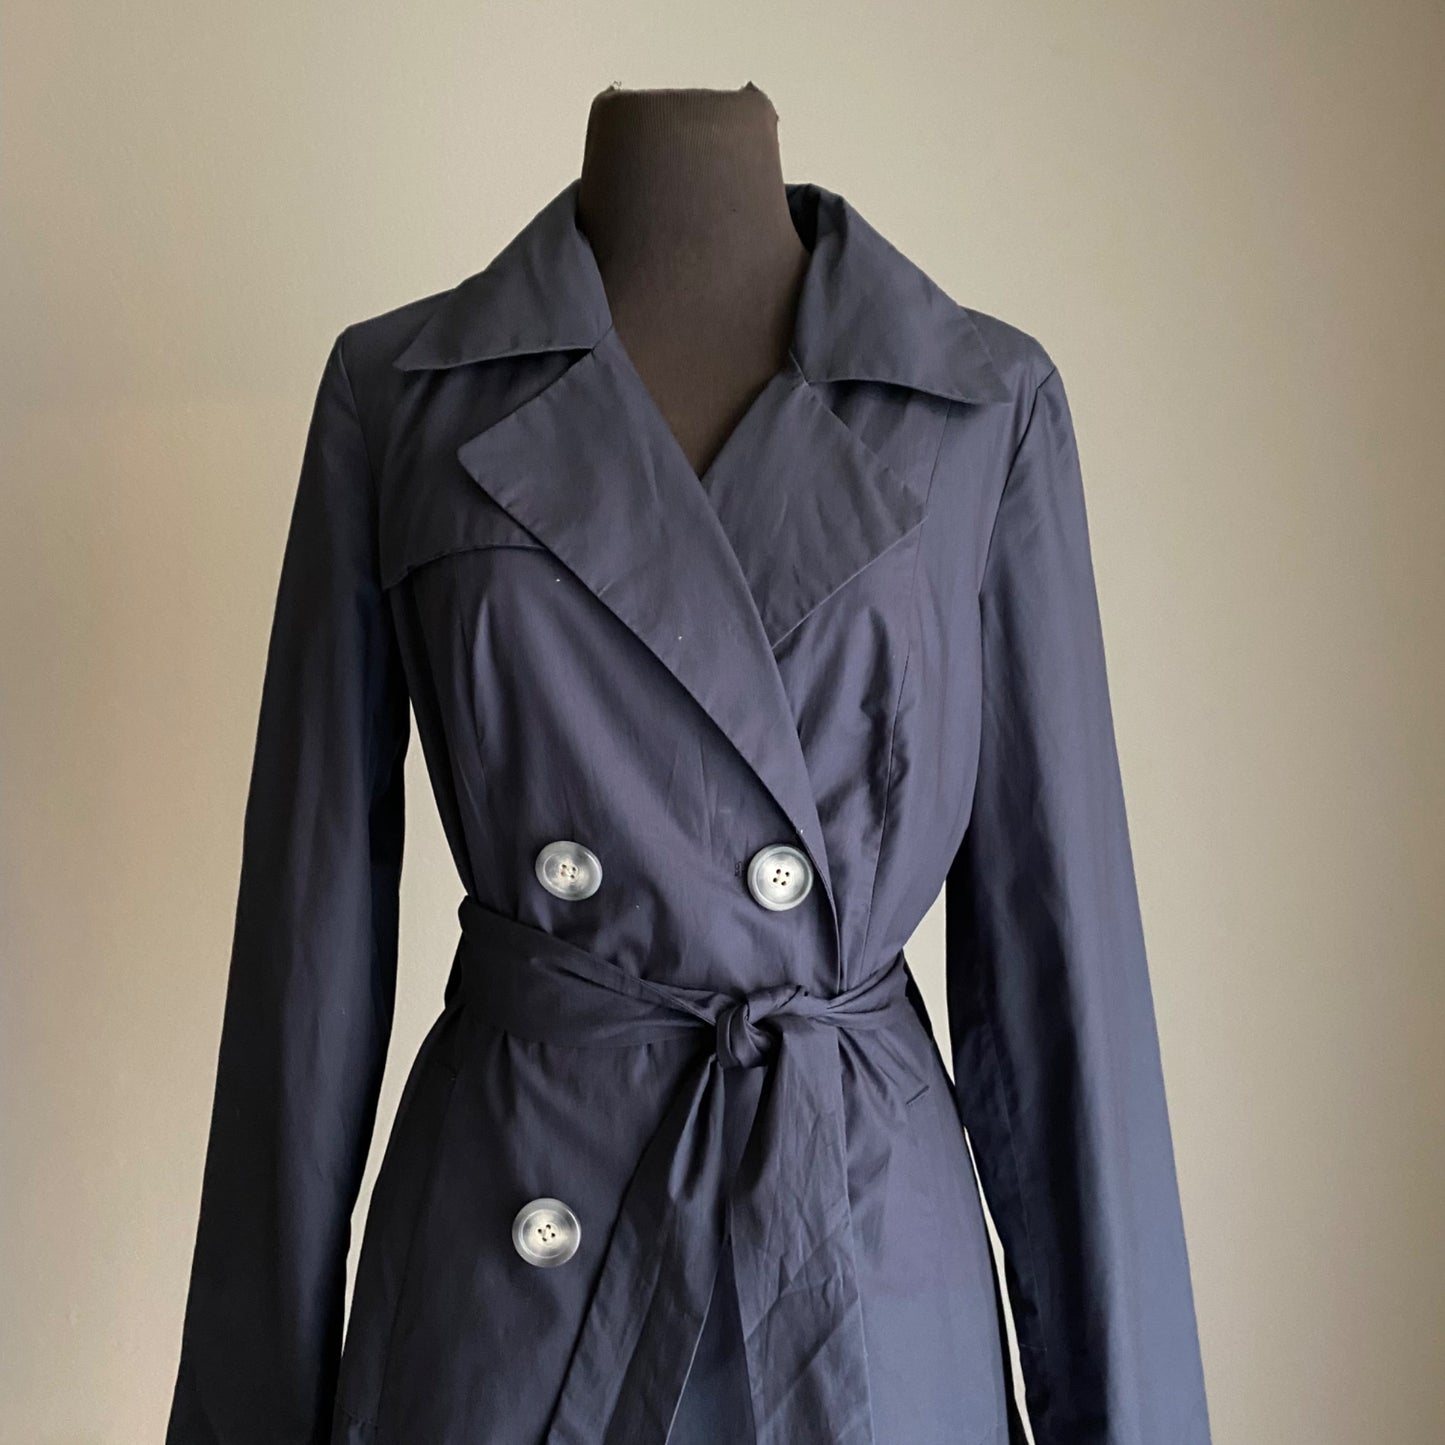 Mossimo sz M 100% cotton long sleeve double breasted Trench coat